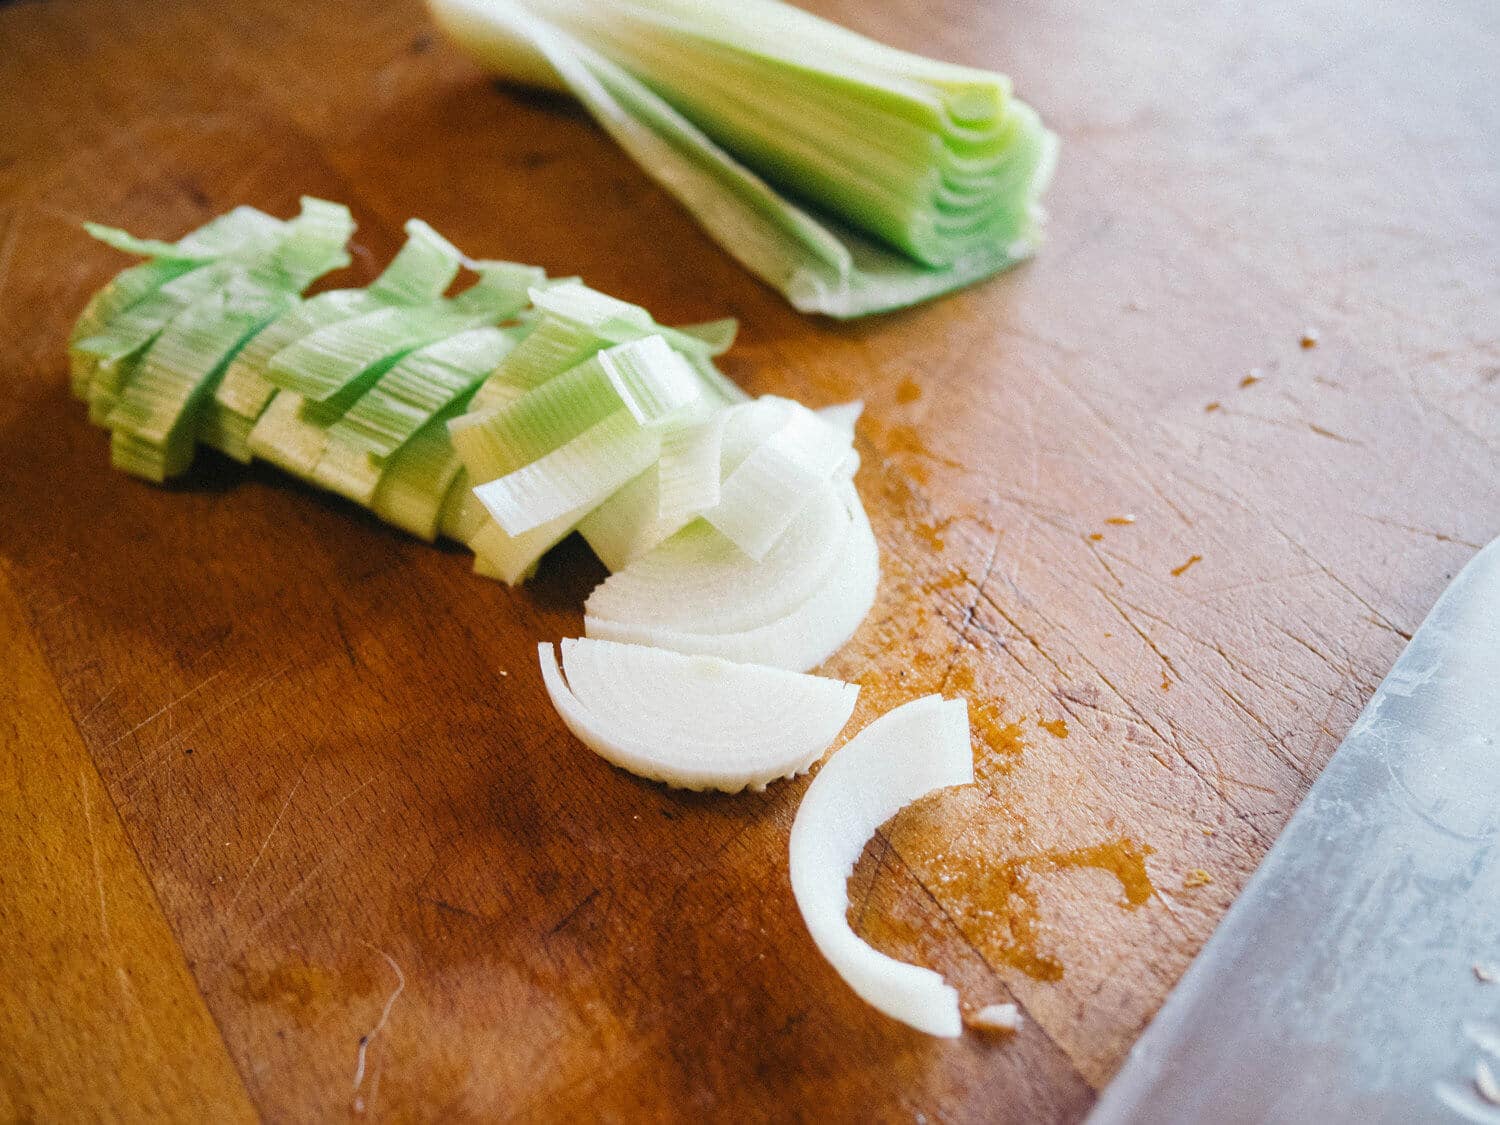 Thinly slice the leek into half moons